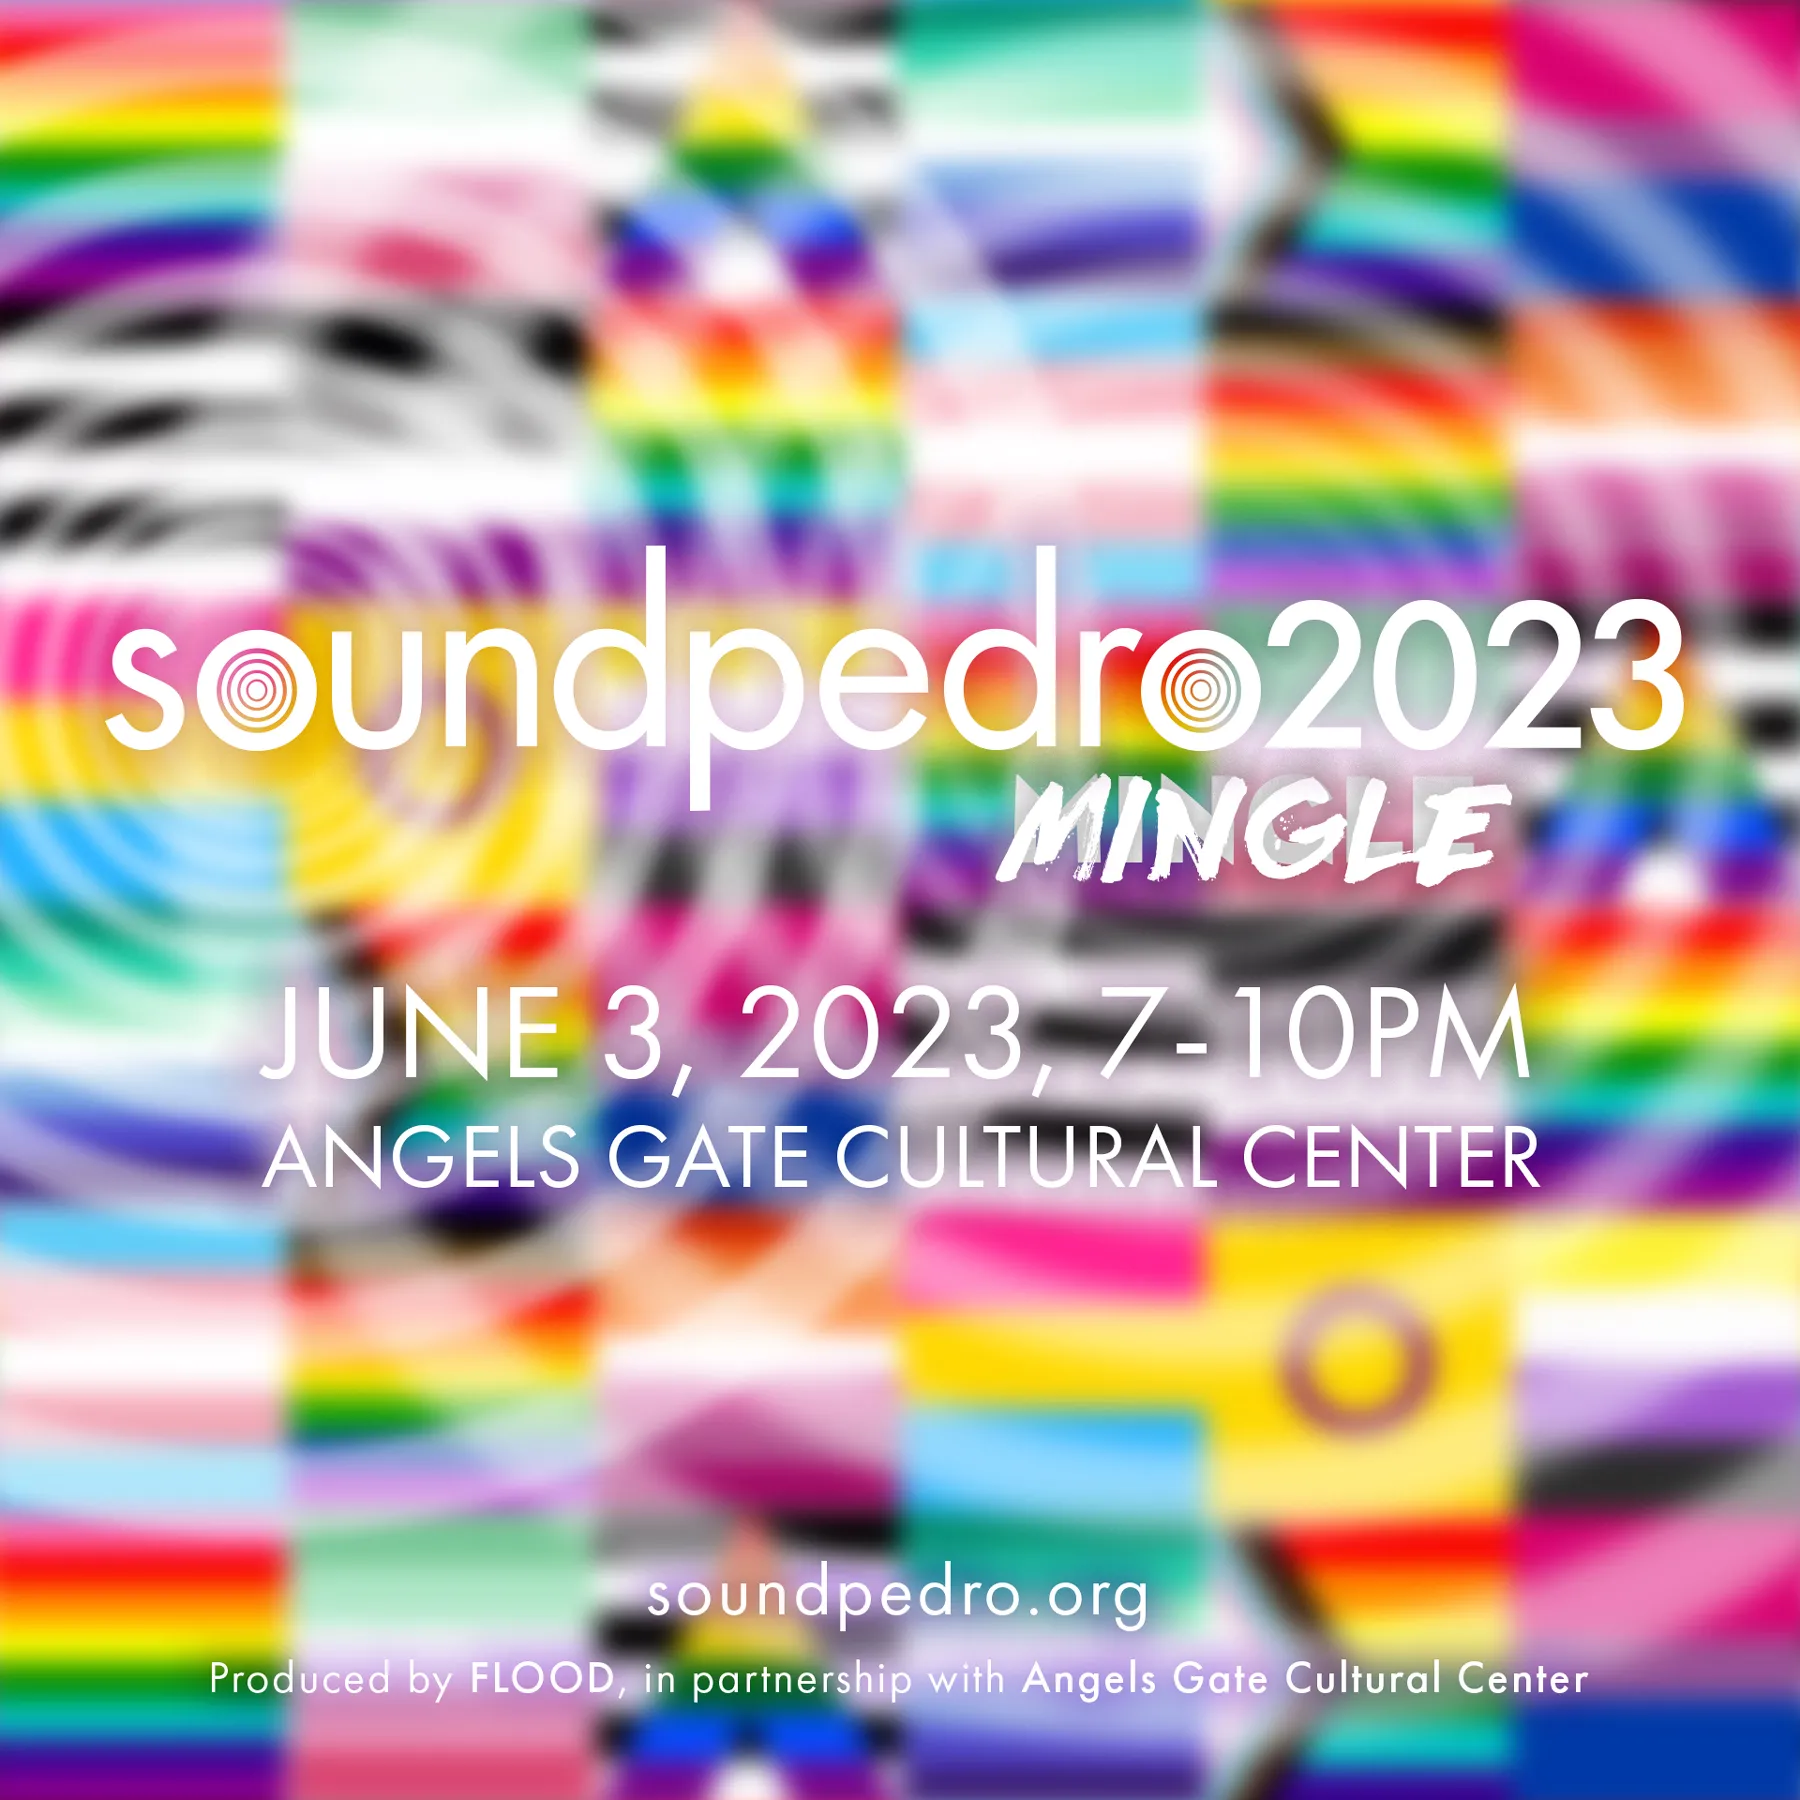 soundpedro2023 MINGLE white logo centered over a blurred grid of bright pride flags with light concentric circle overlays conveying sonic ripples.